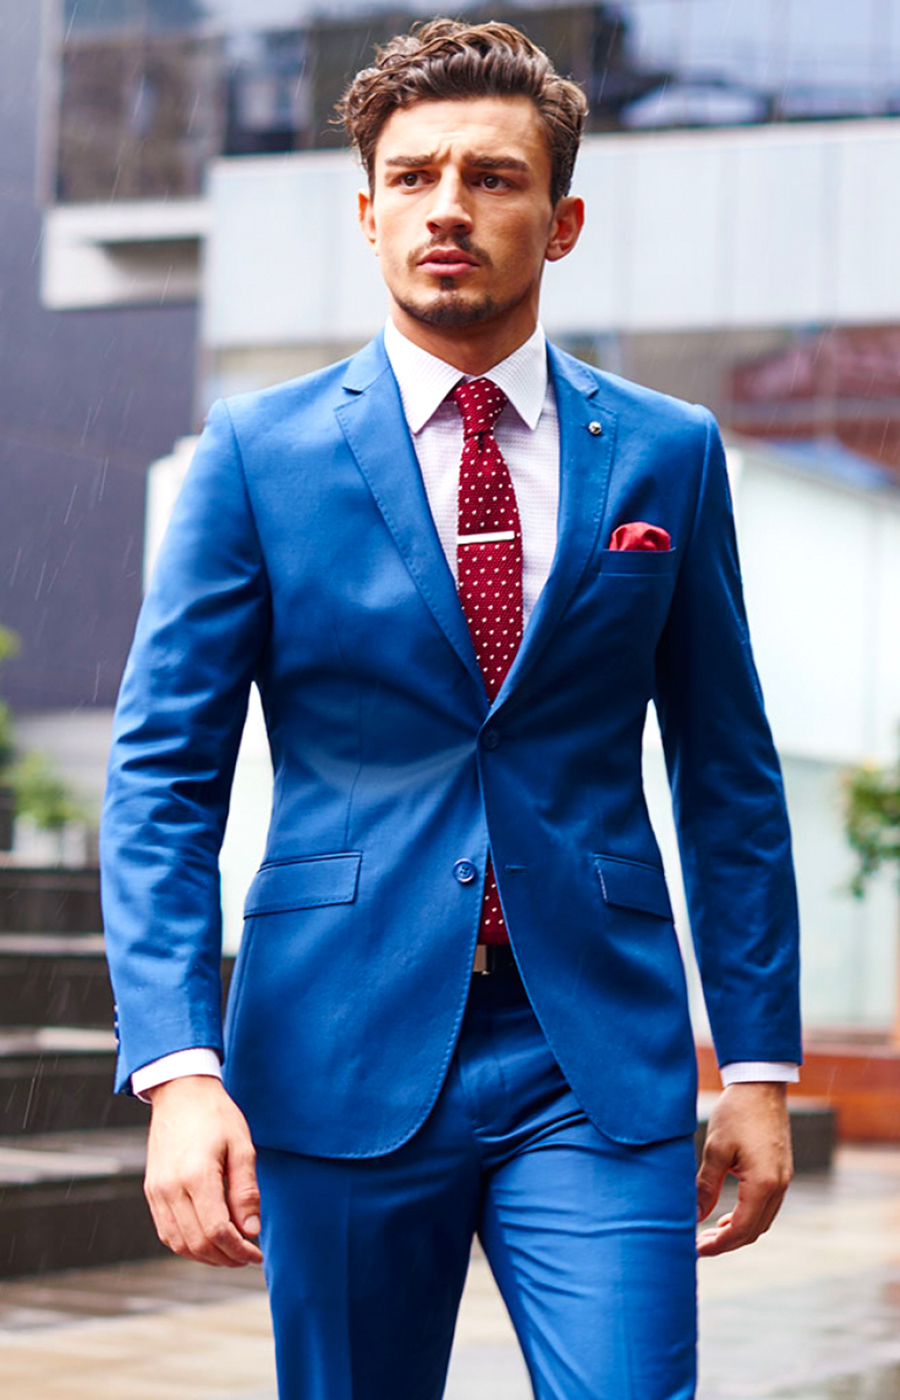 Blue suit matched with a red tie